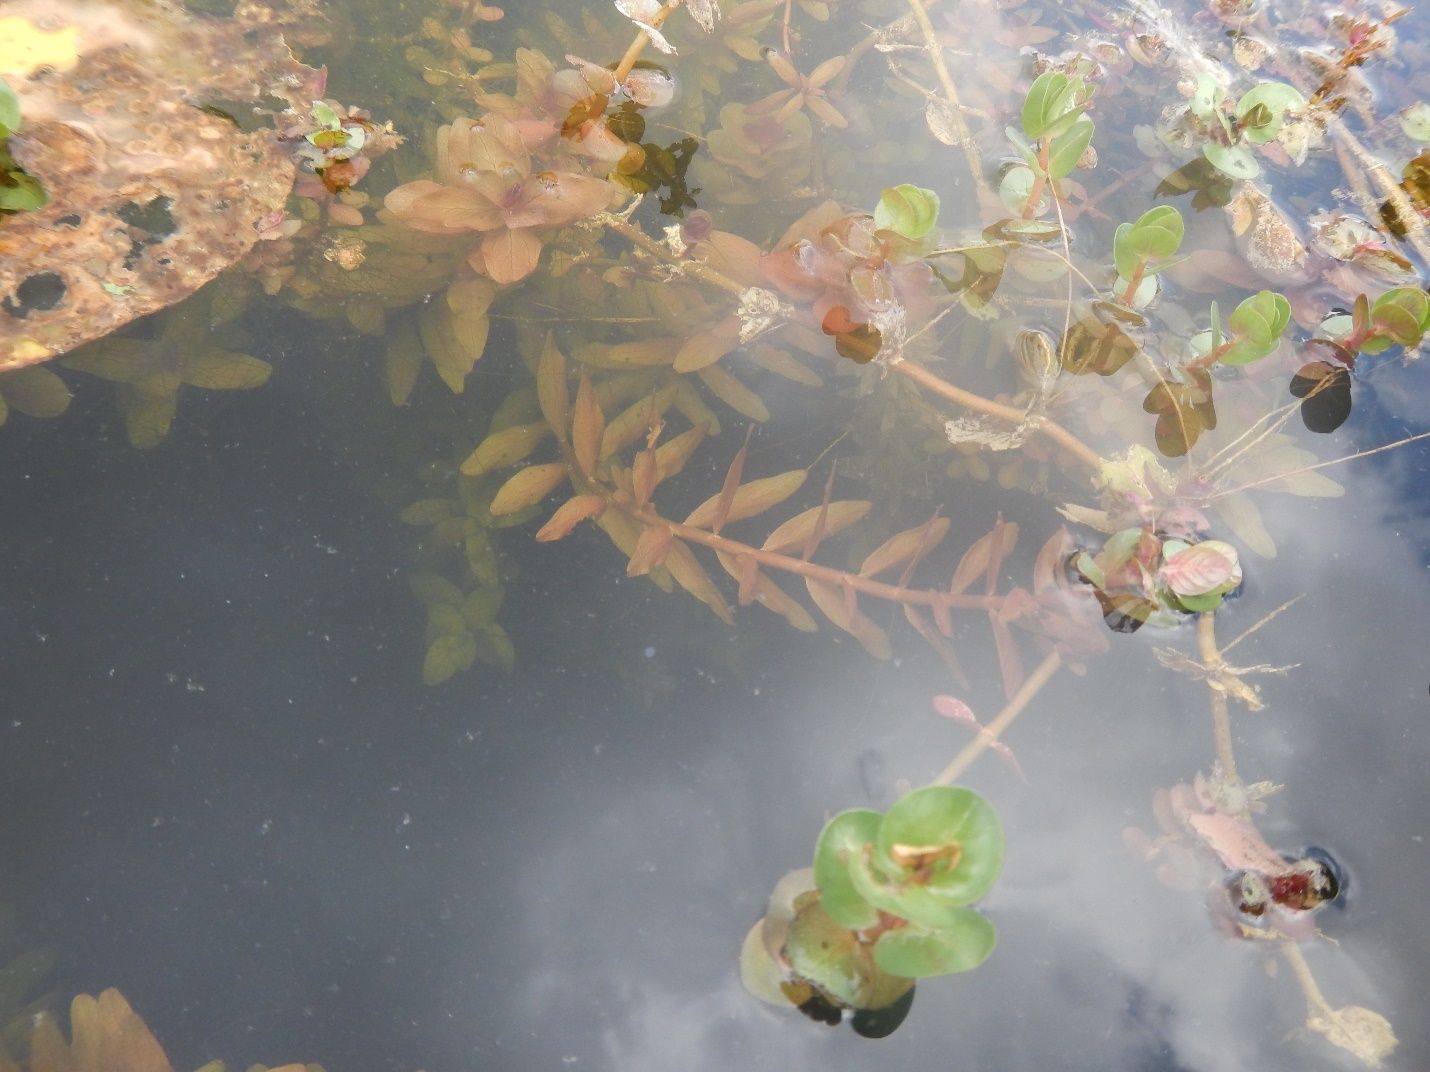 Rotala sp. displaying heterophyllous vegetation. The leaves growing above the water line are broader and more round then the narrow, slender leaves growing below the water line. 